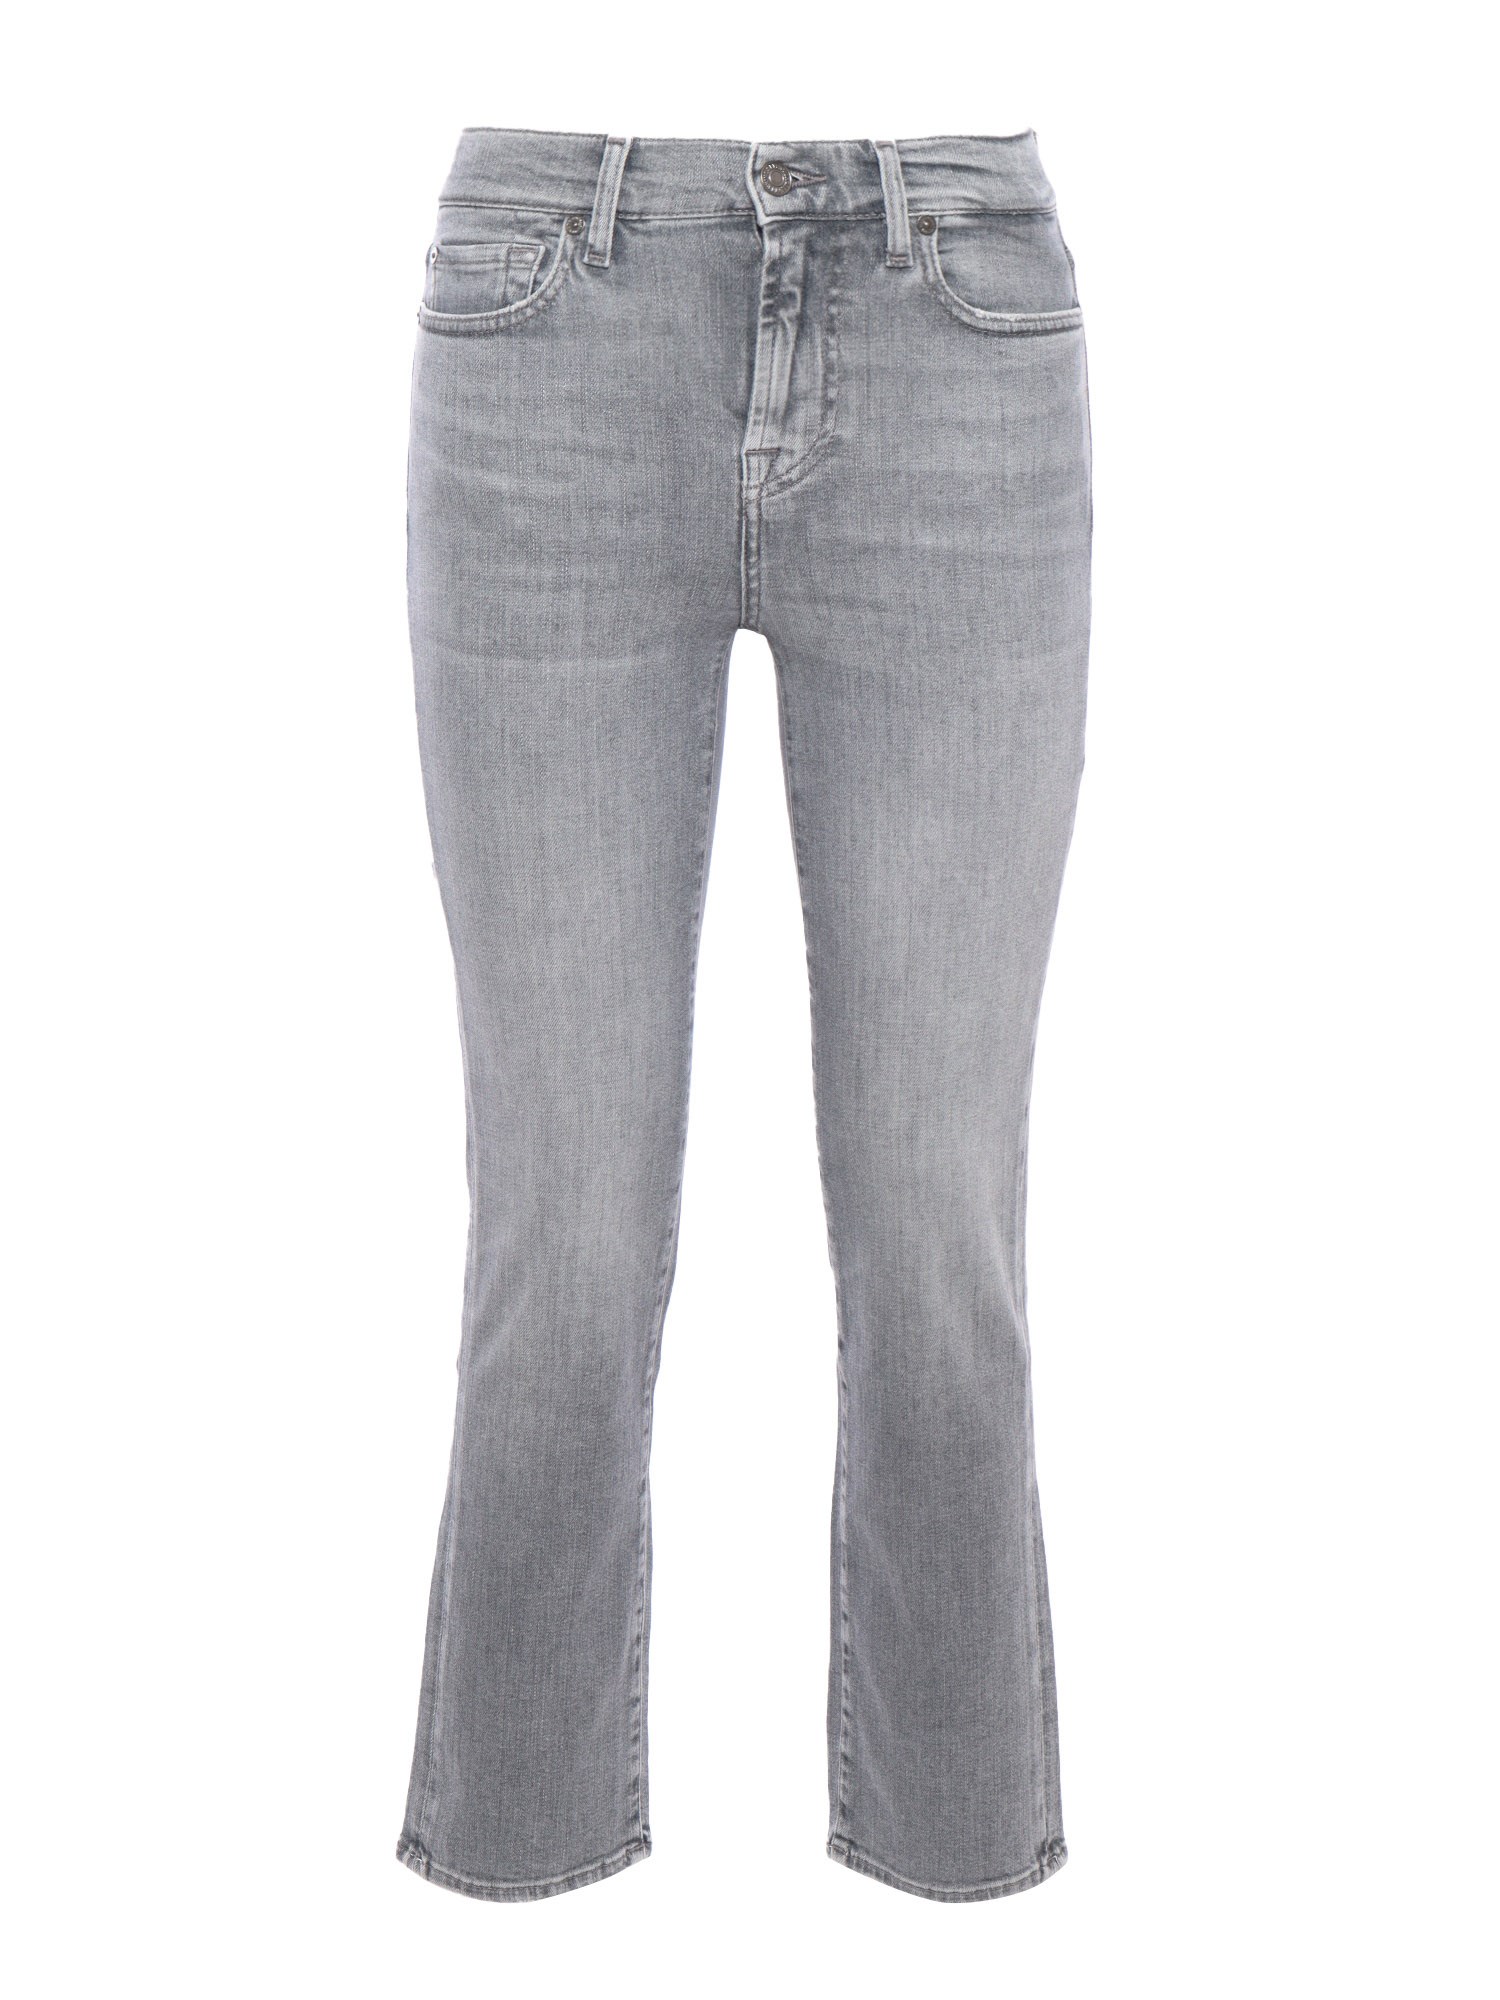 7 For All Mankind Cropped Womens Jeans. In Grey